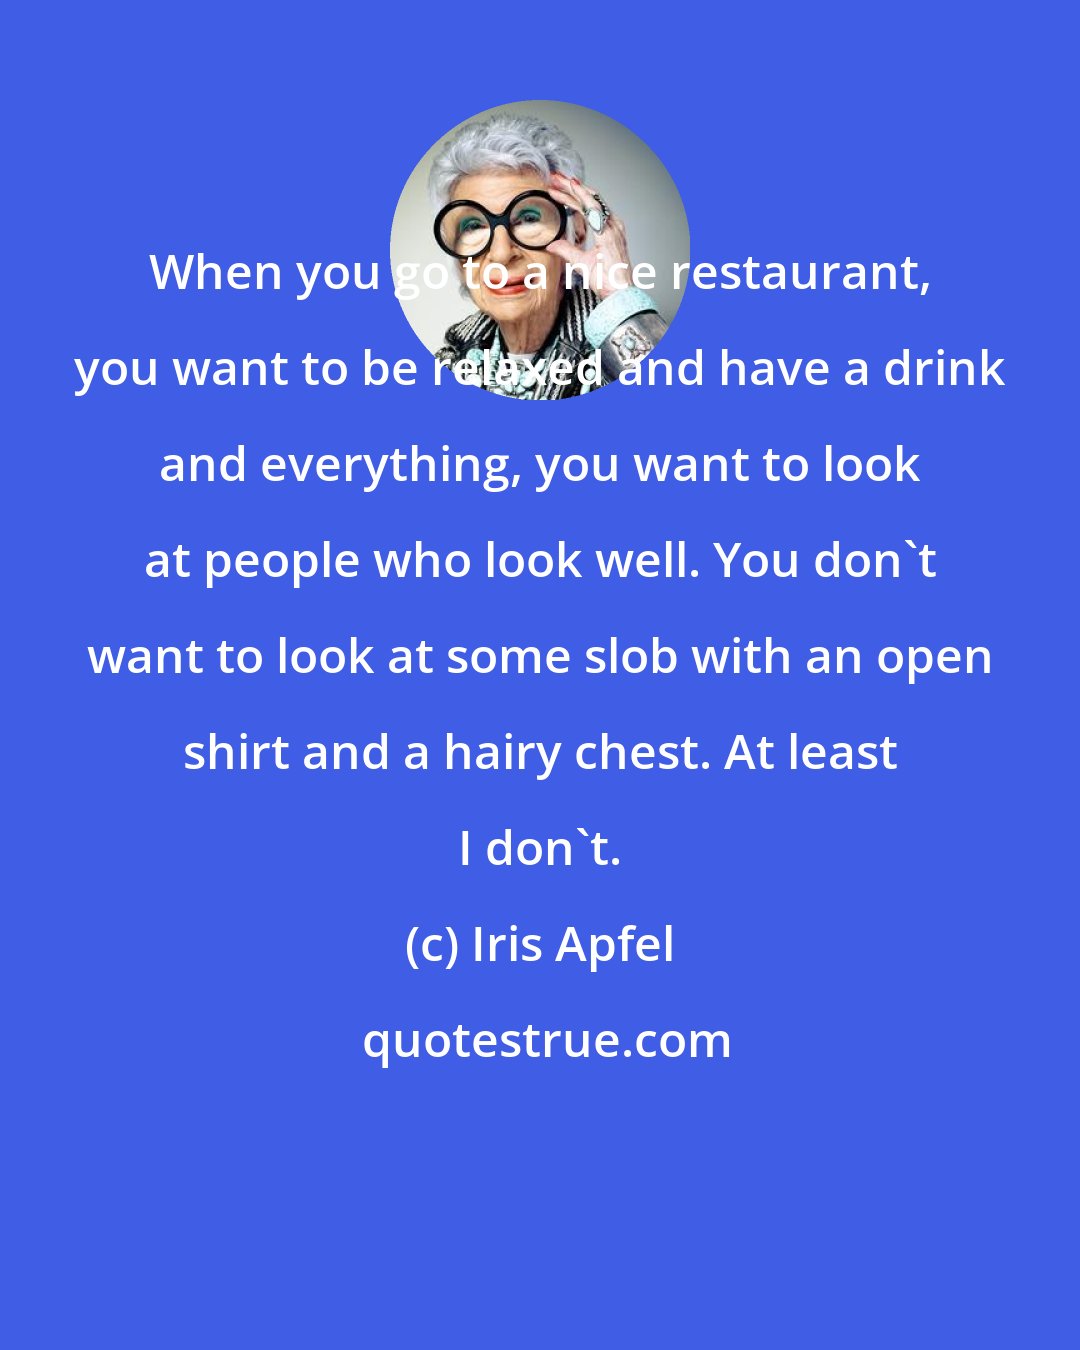 Iris Apfel: When you go to a nice restaurant, you want to be relaxed and have a drink and everything, you want to look at people who look well. You don't want to look at some slob with an open shirt and a hairy chest. At least I don't.